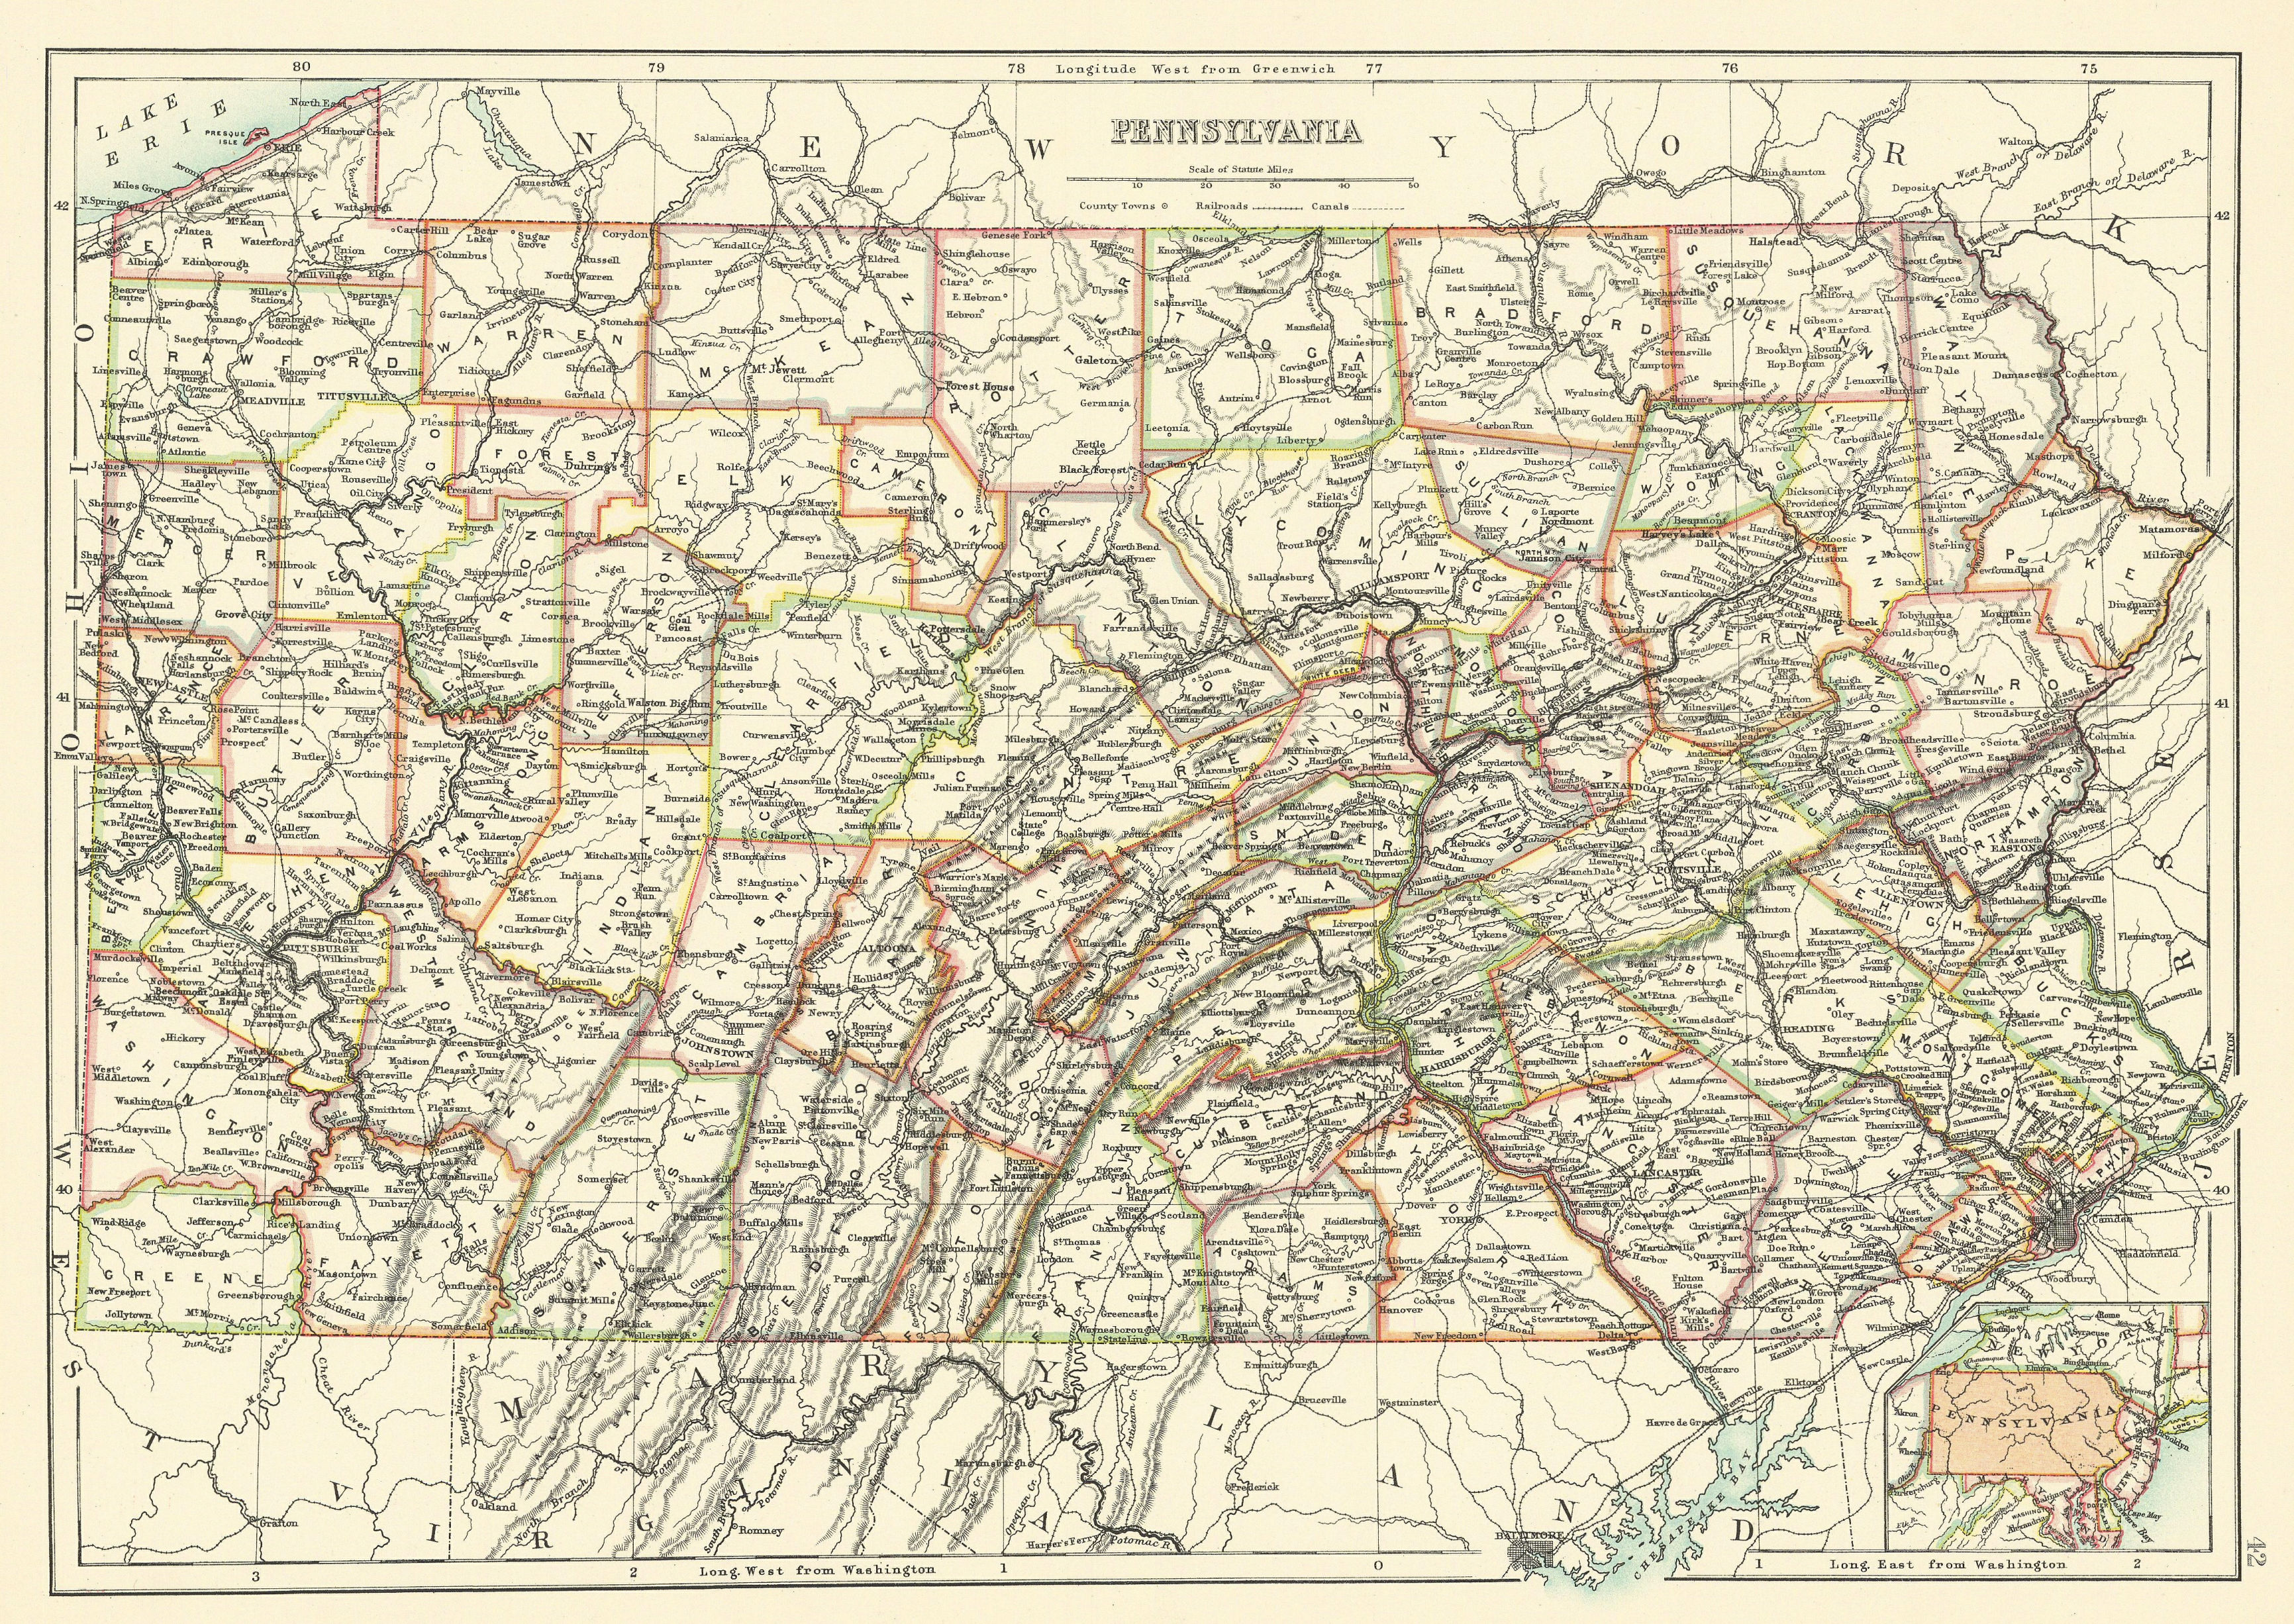 Pennsylvania state map showing counties. BARTHOLOMEW 1898 old antique